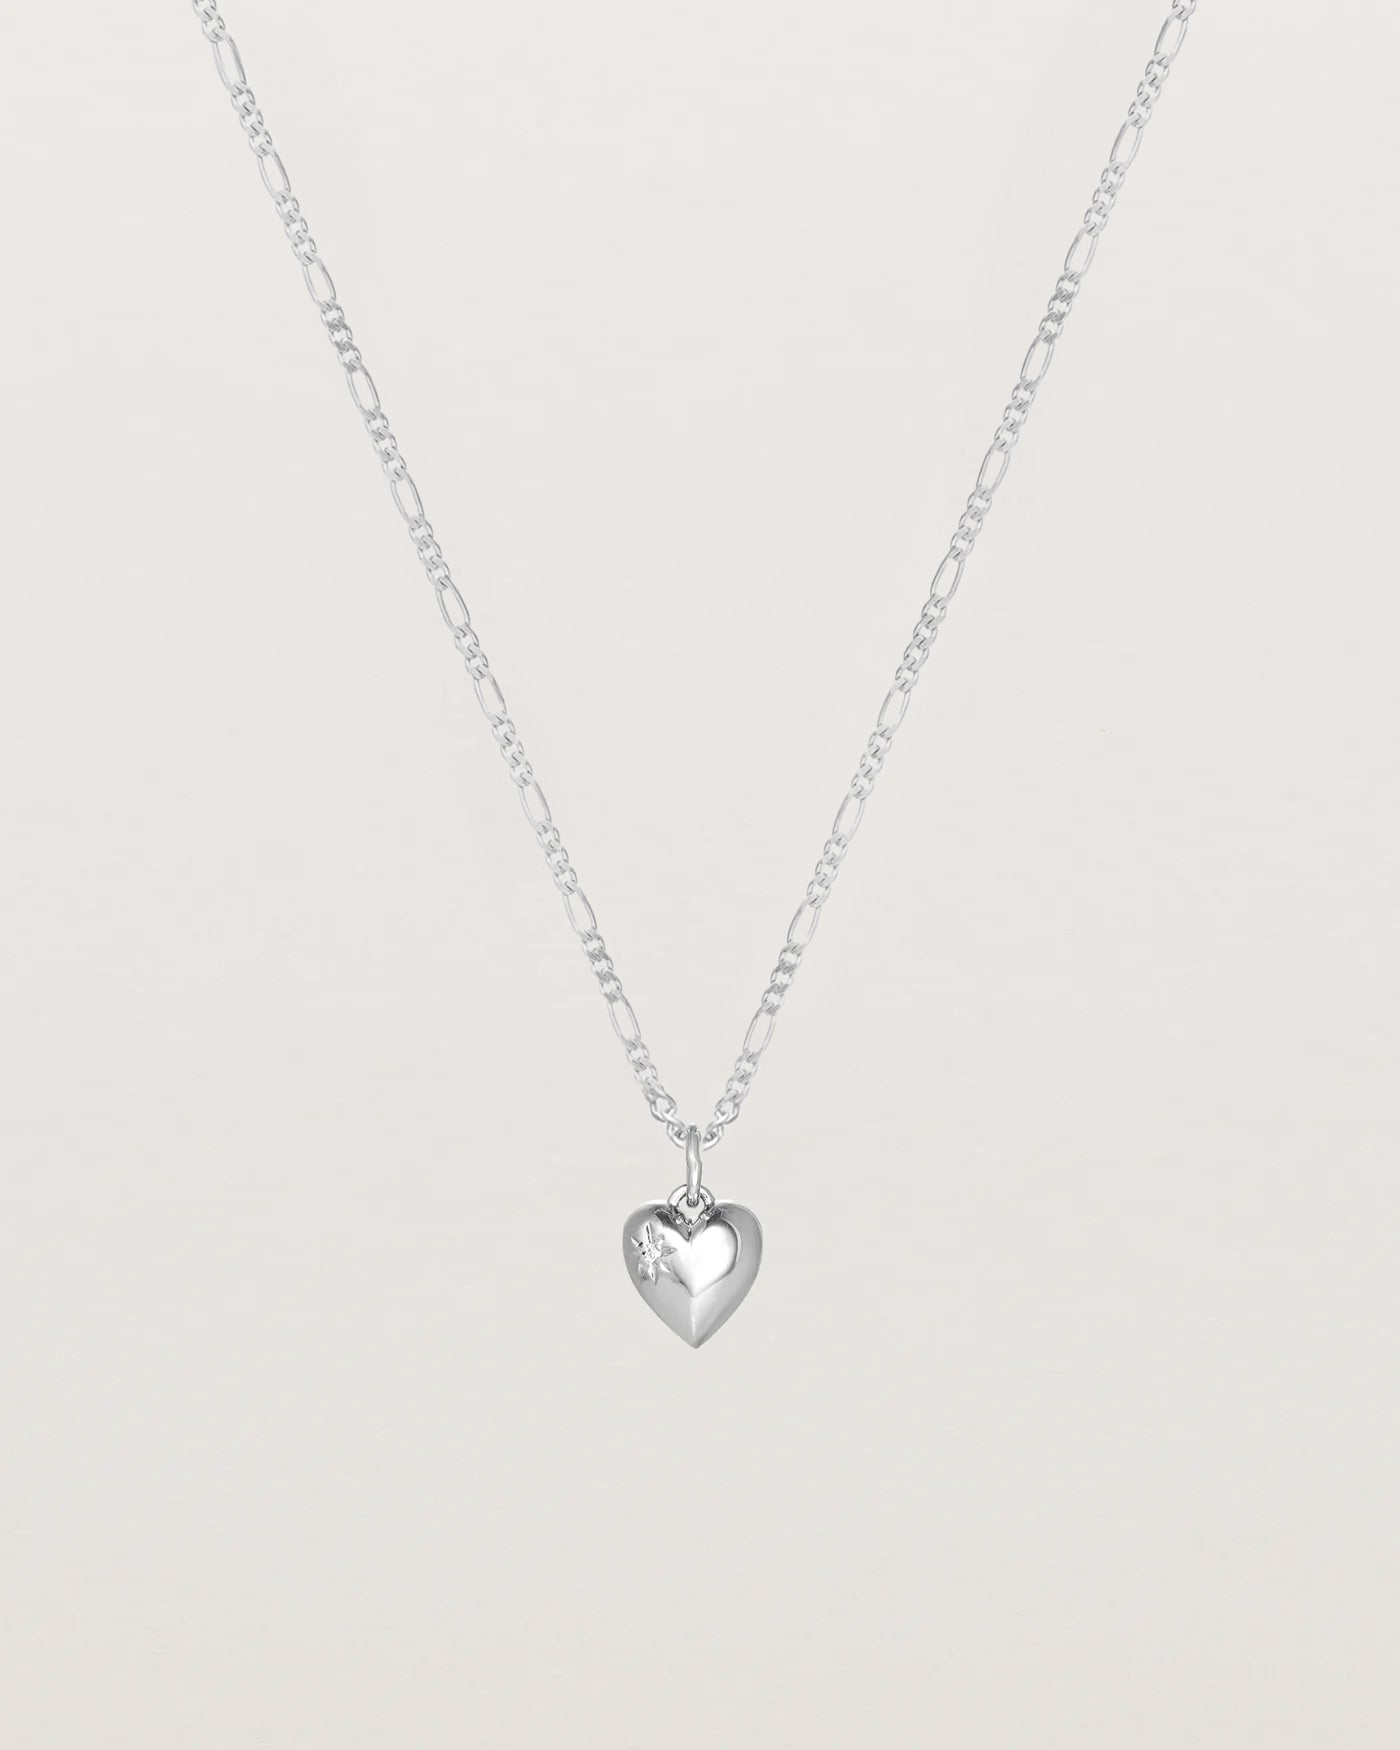 Image of a heart necklace in sterling silver.